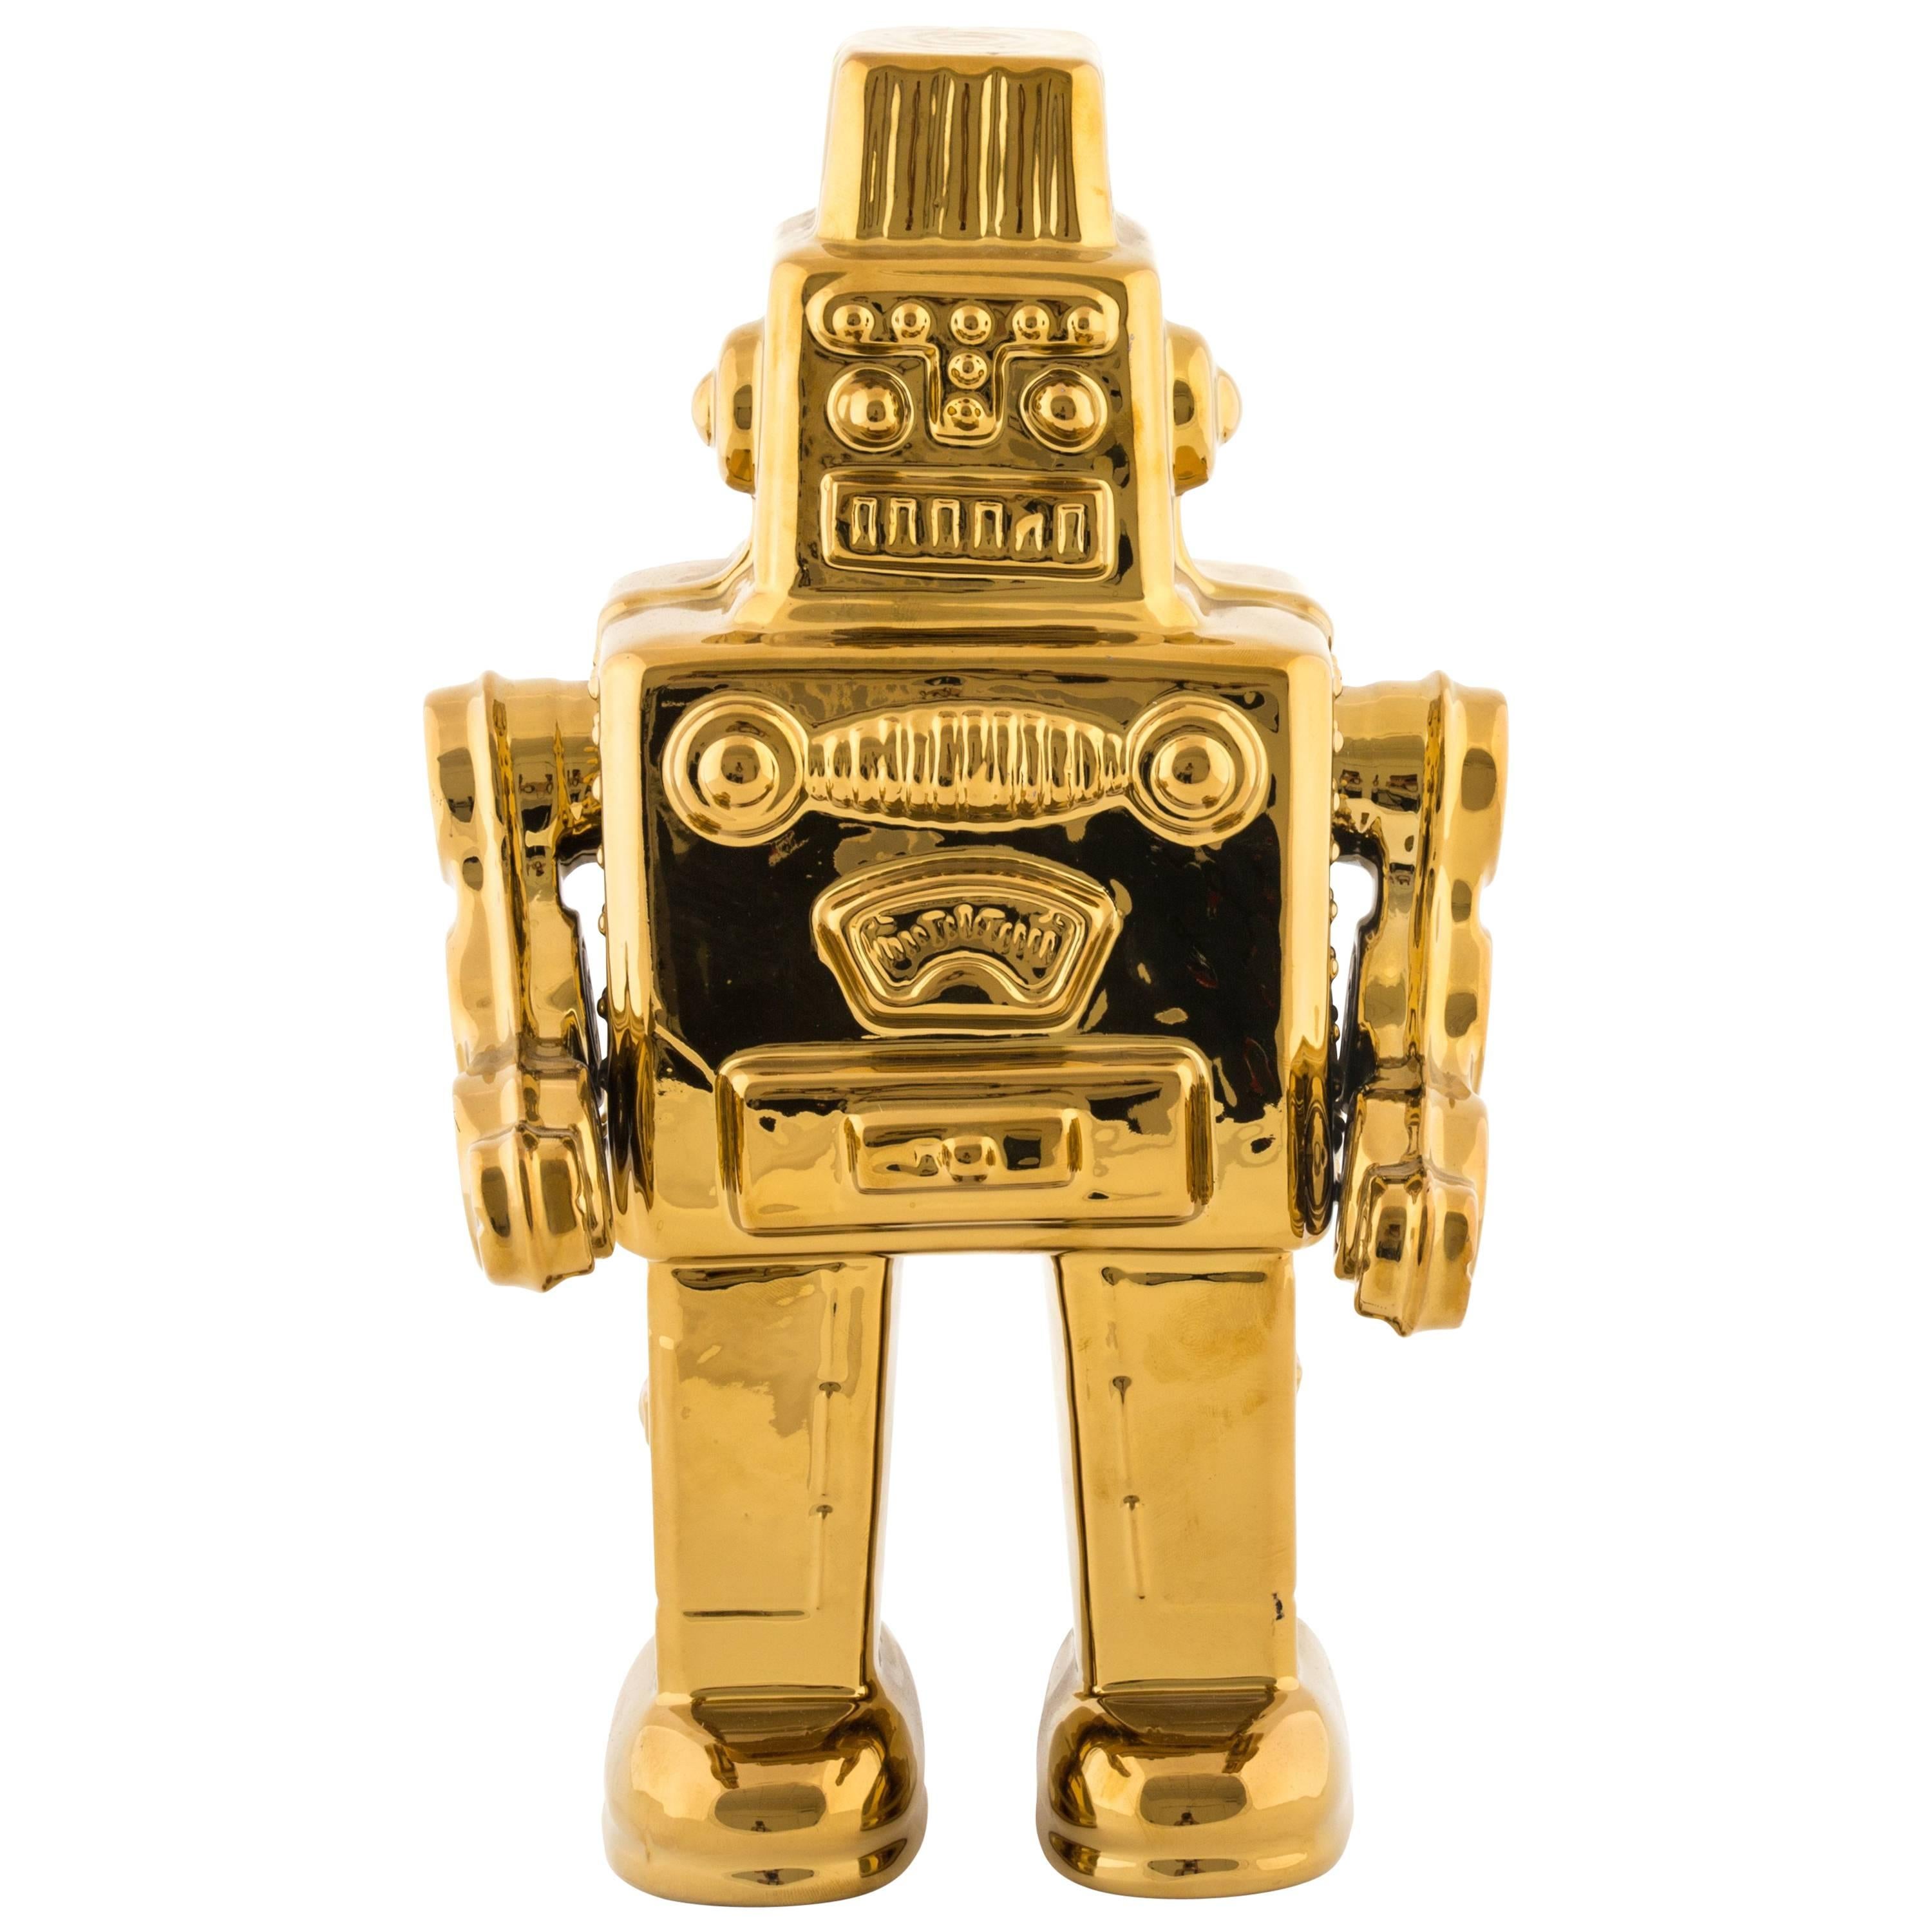 Seletti "Limited Gold Edition" Porcelain My Robot